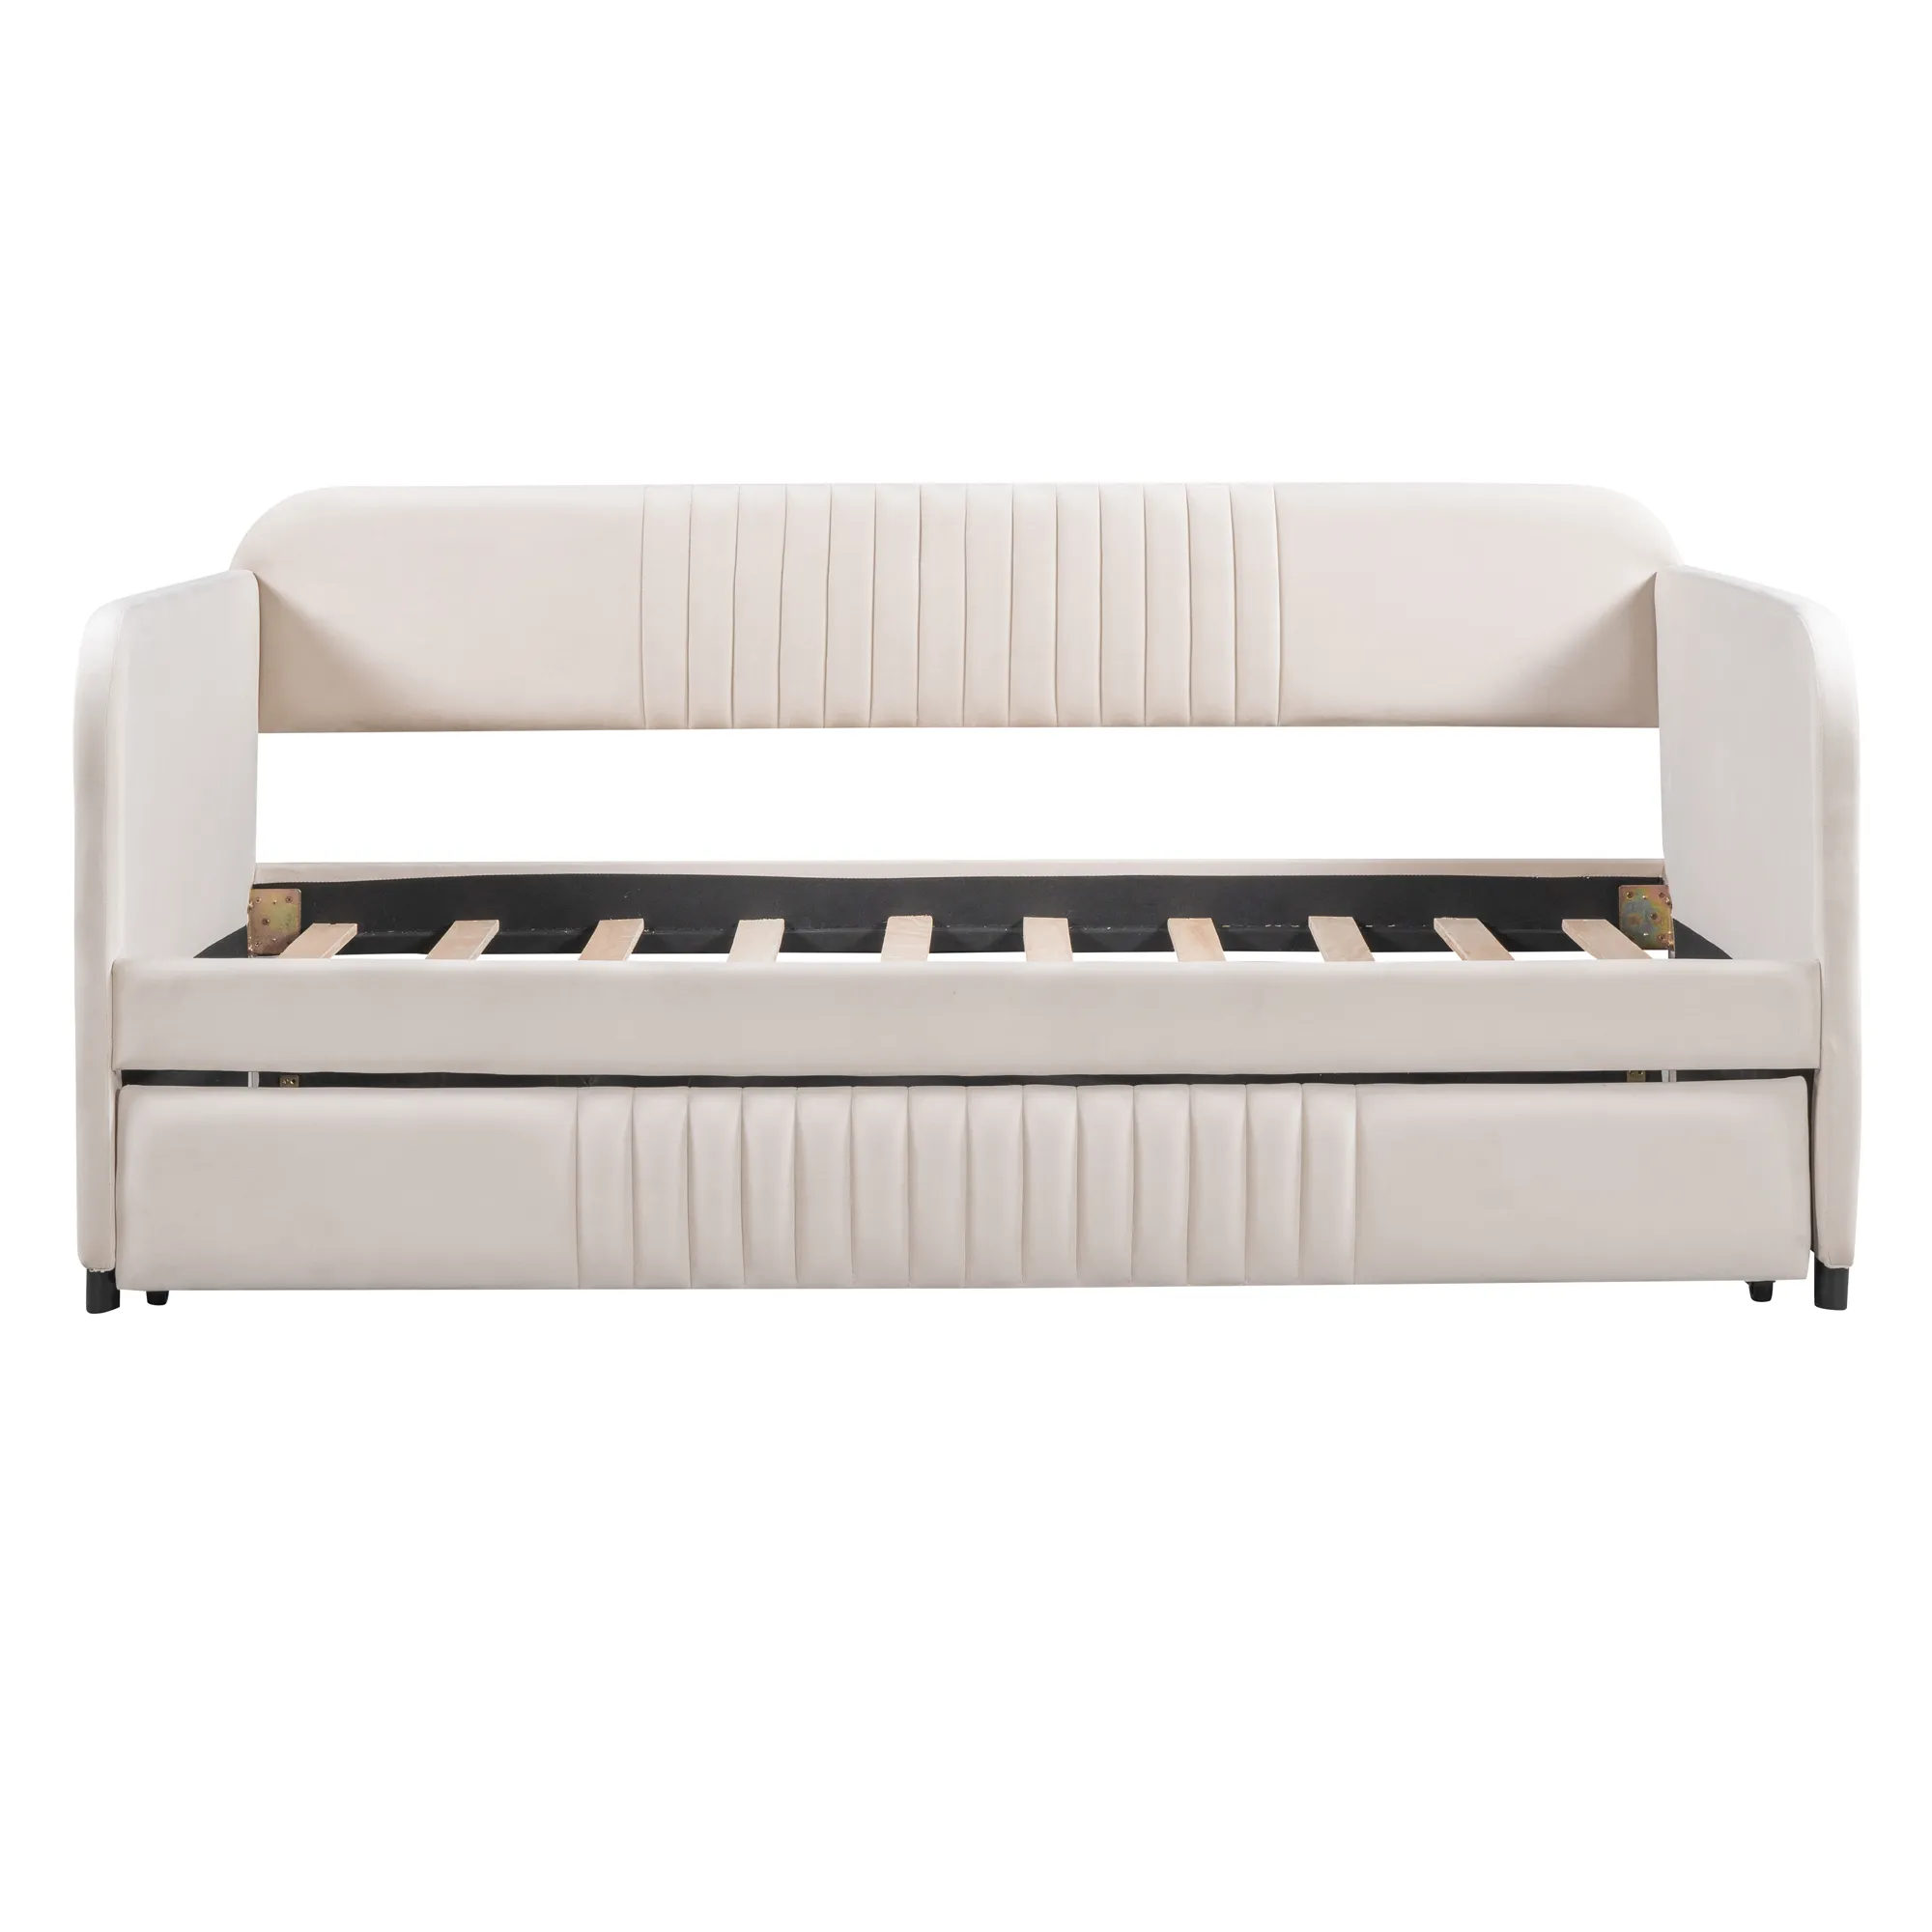 Merax Upholstered Daybed Sofa Bed With Trundle